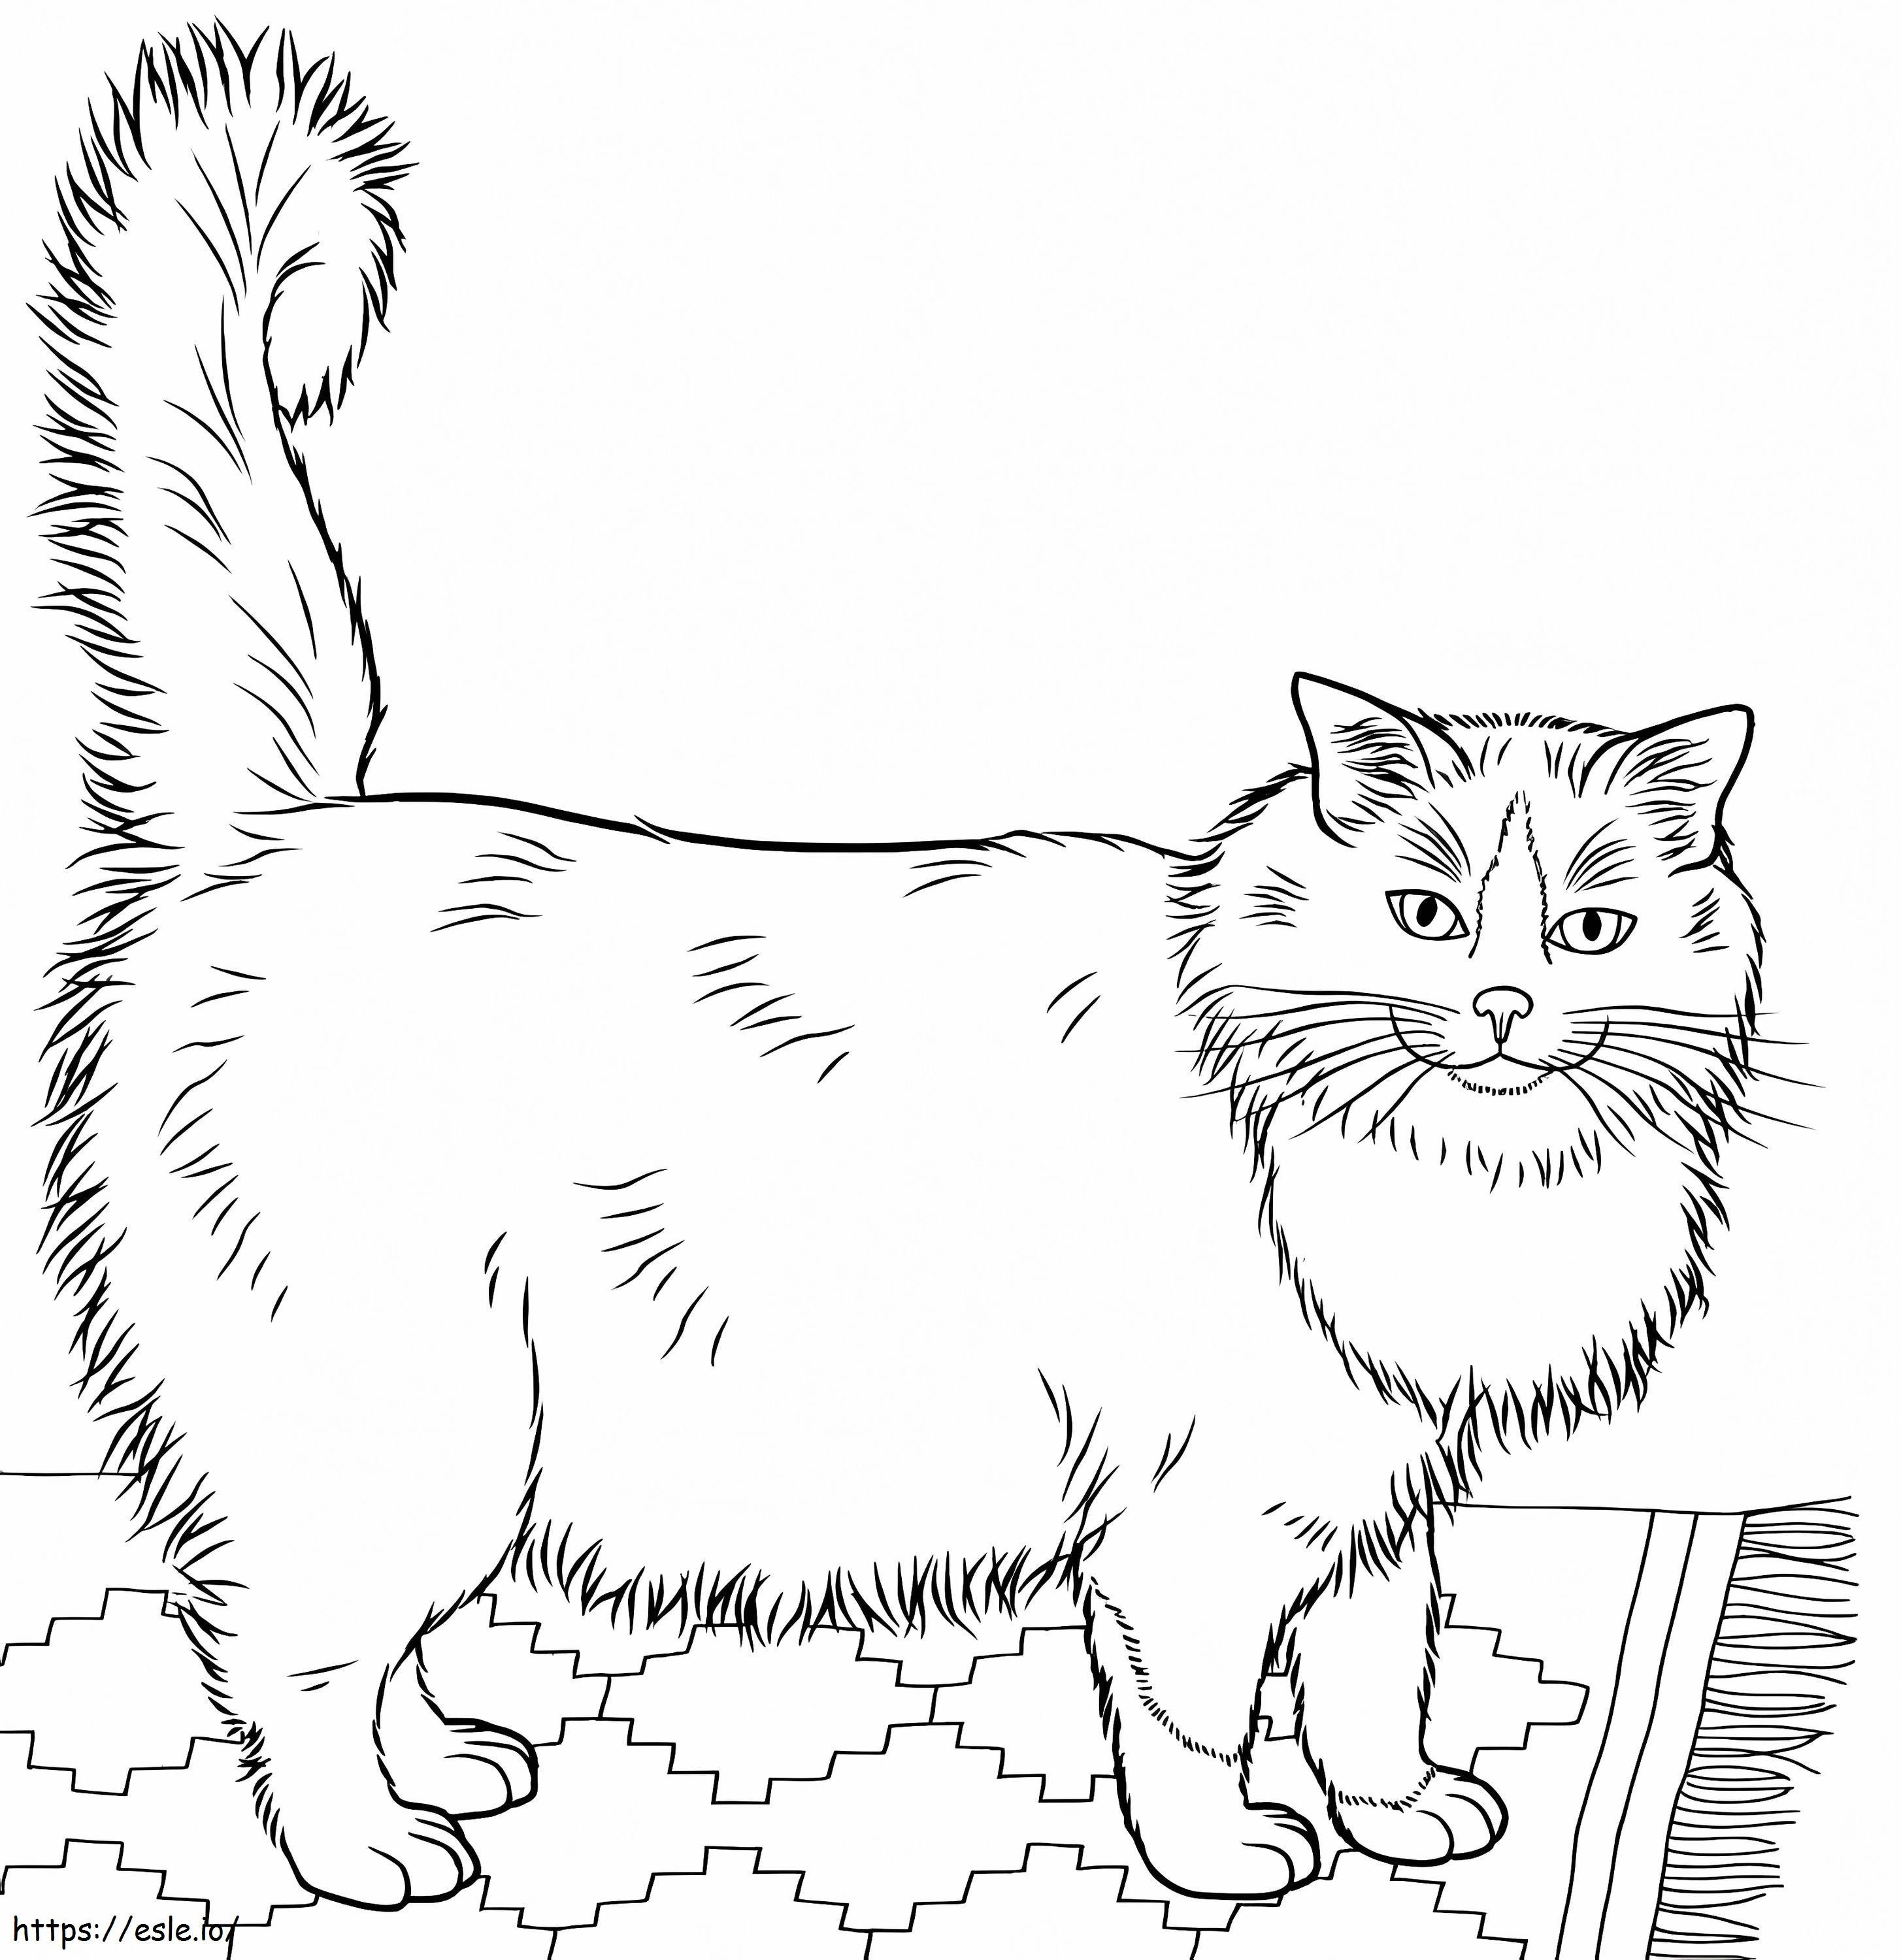 Ragdoll Cat 1 coloring page